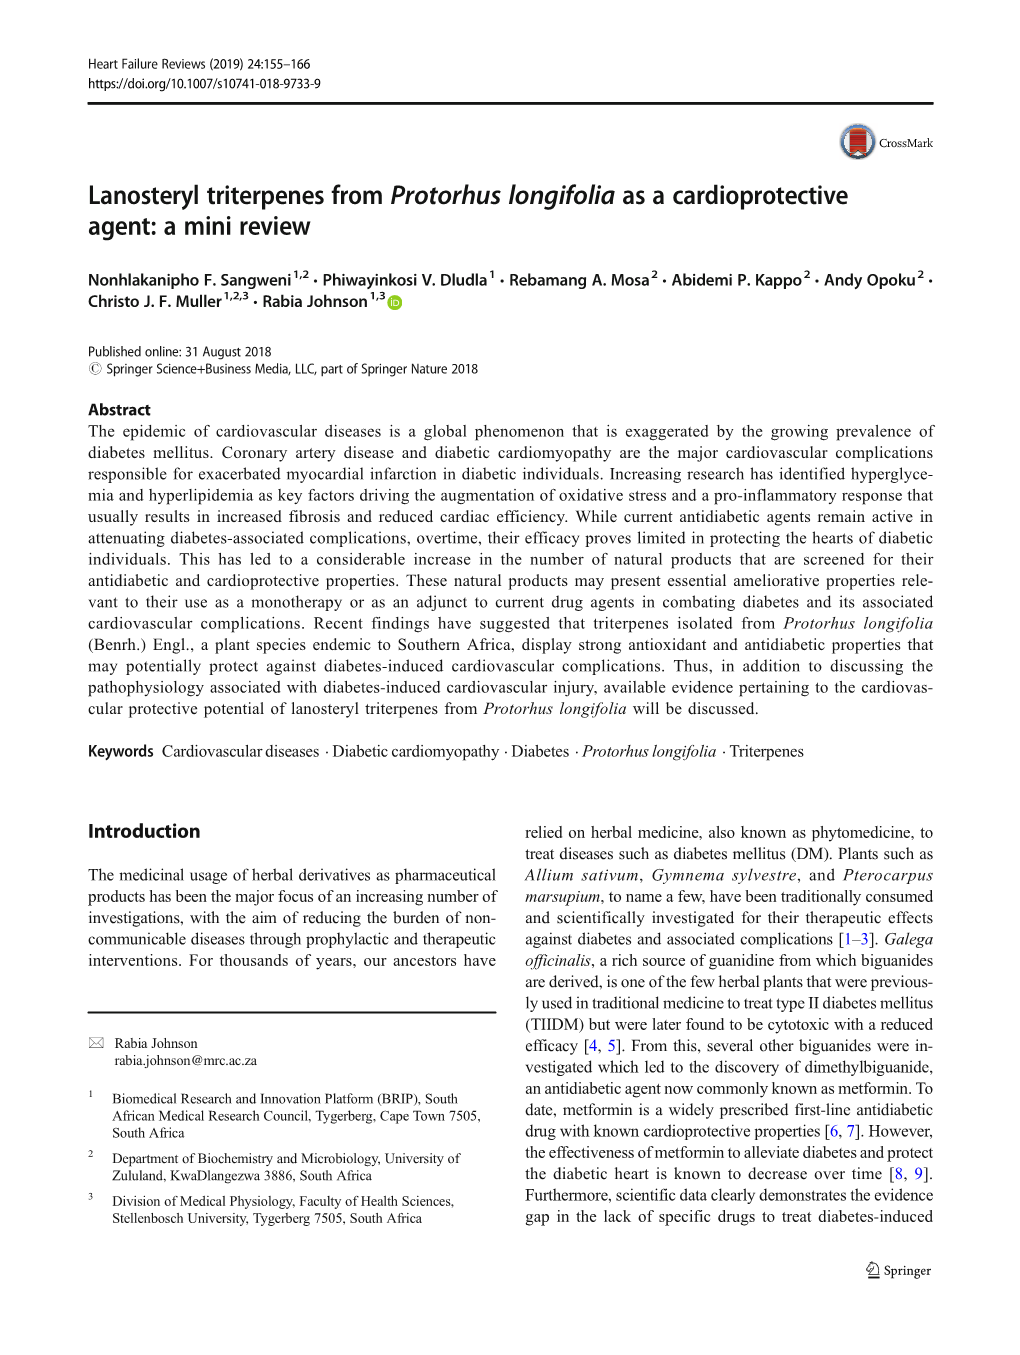 Lanosteryl Triterpenes from Protorhus Longifolia As a Cardioprotective Agent: a Mini Review